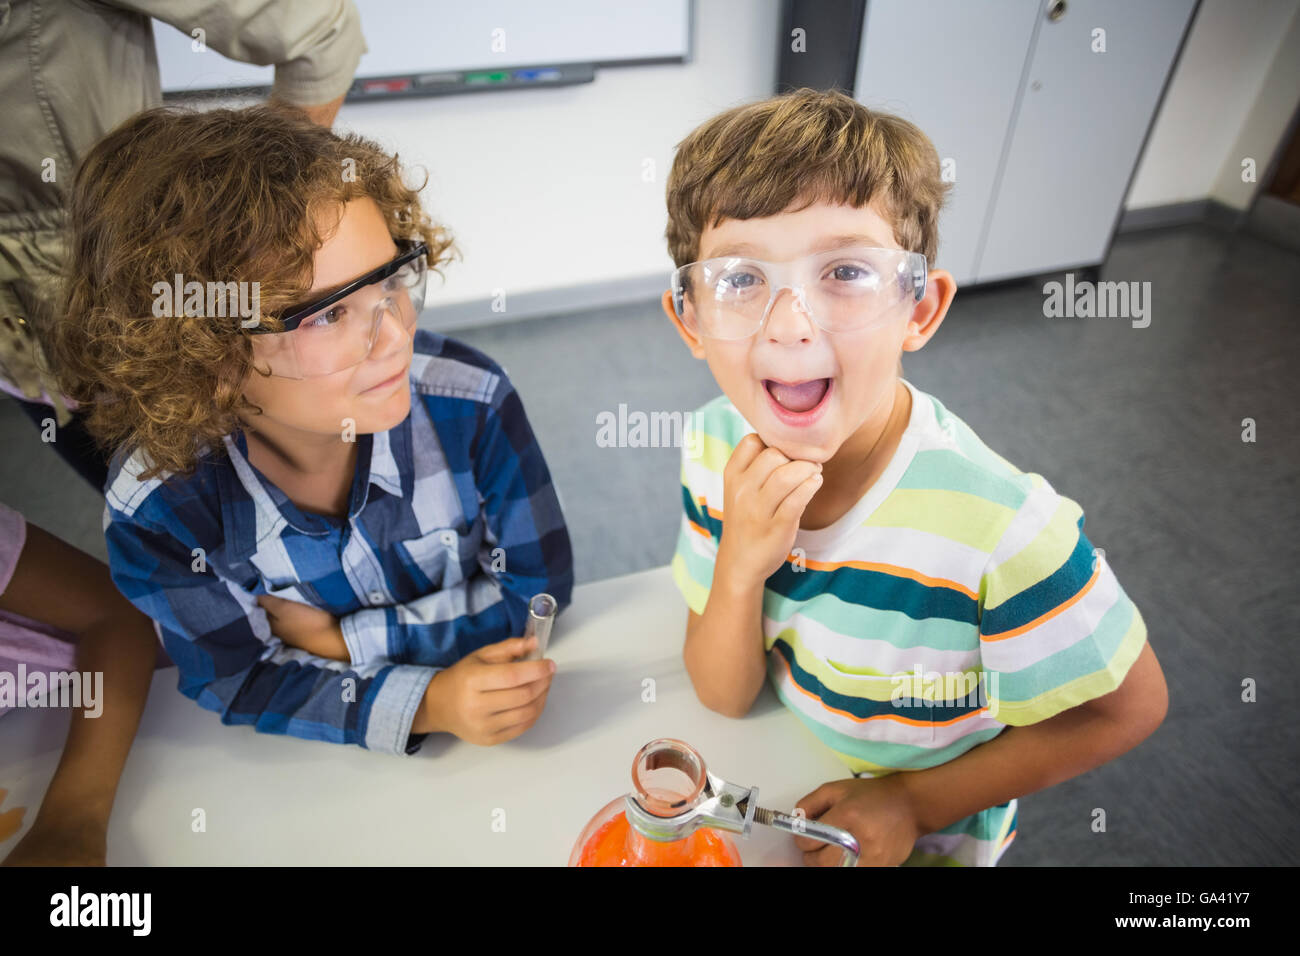 Kids posing in laboratory Banque D'Images